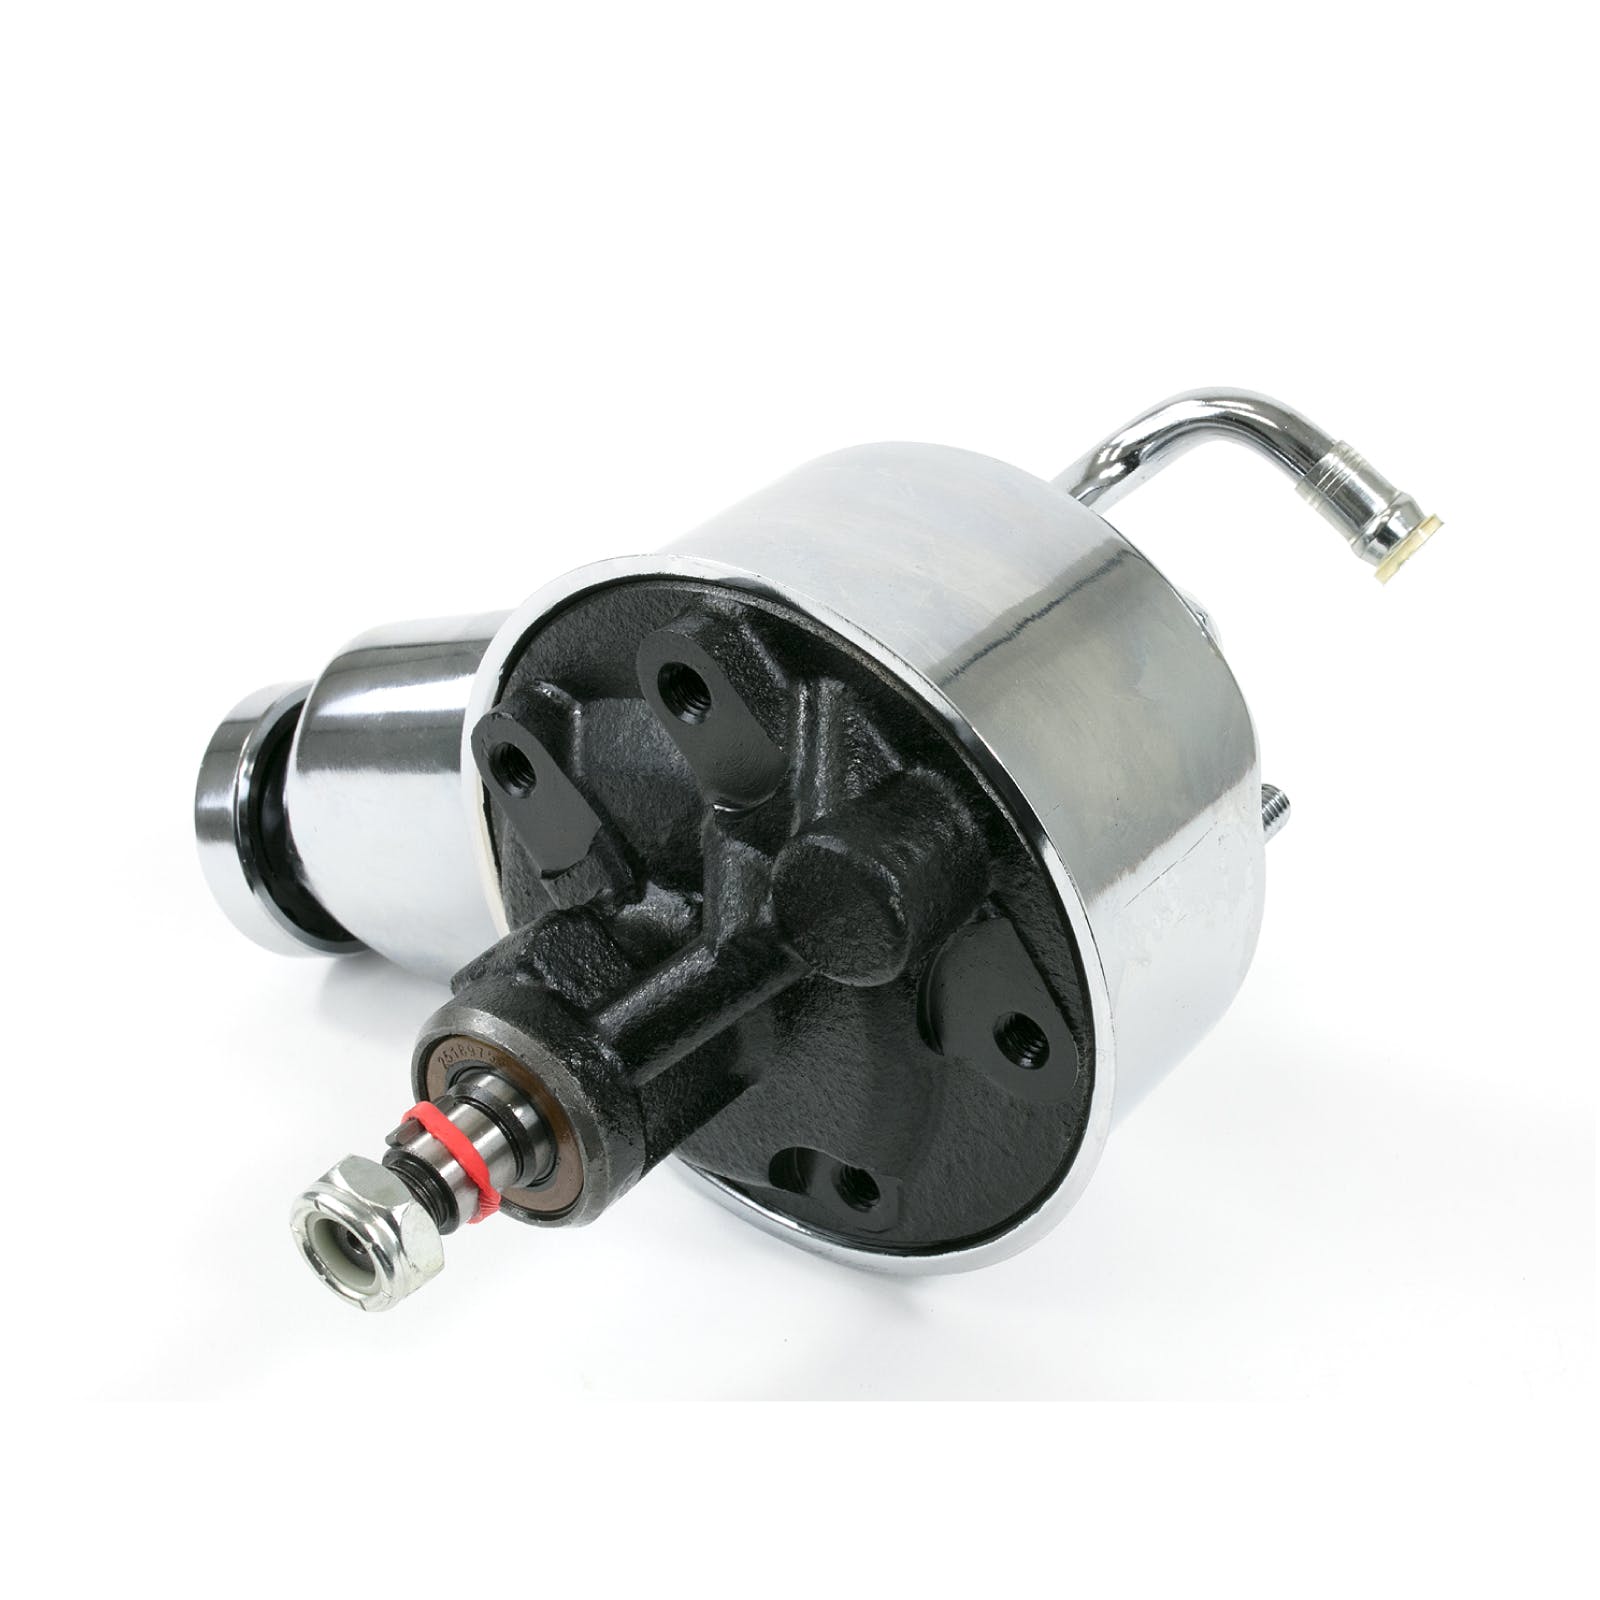 Top Street Performance JM2003C GM Early Saginaw Power Steering Pump With Billet Aluminum Cap and Dipstick, Chrome